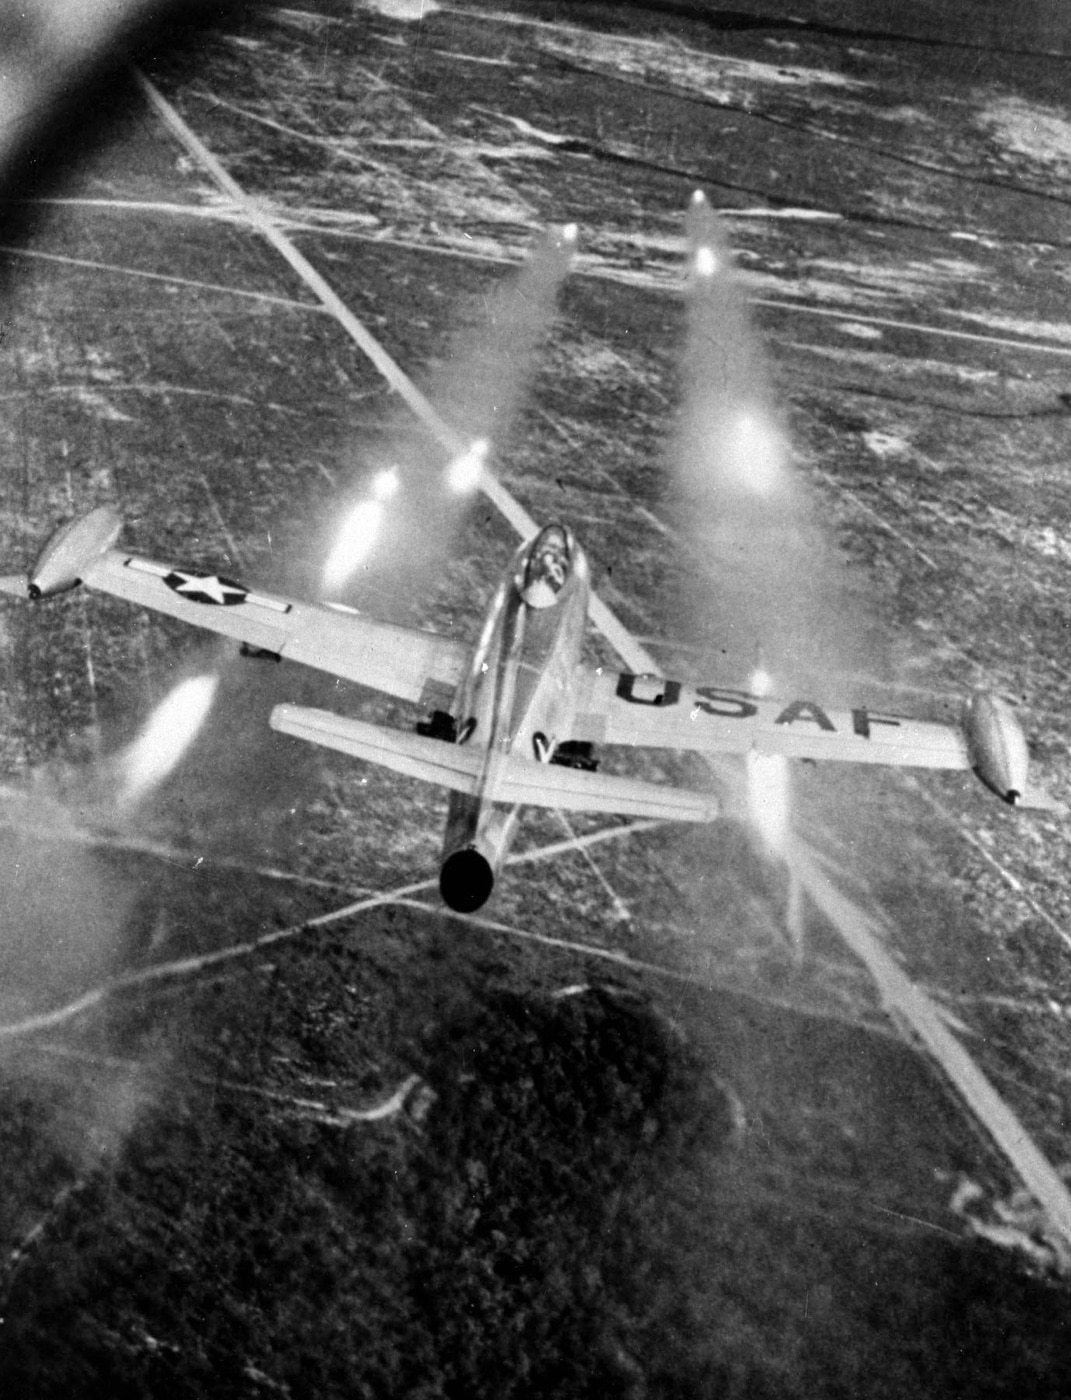 F-84 fires rockets at a ground target